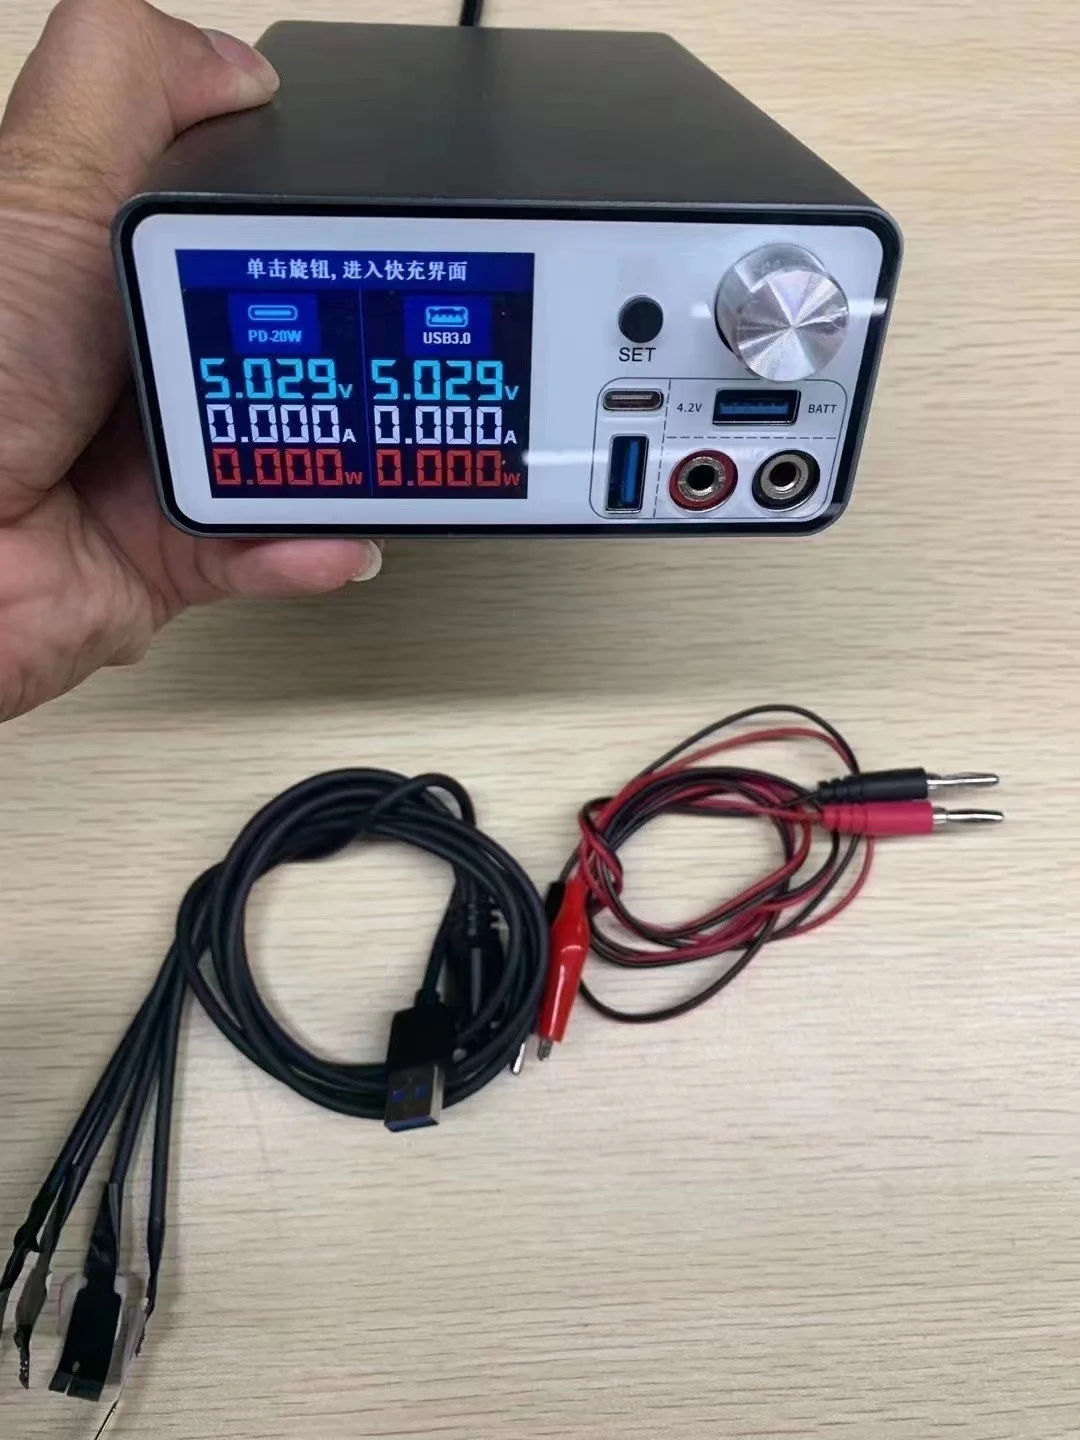 New. P2408 Intelligent Stabilized Power Supply With Adjustable Voltage And Current/Powerful New Updating Version . enlarge